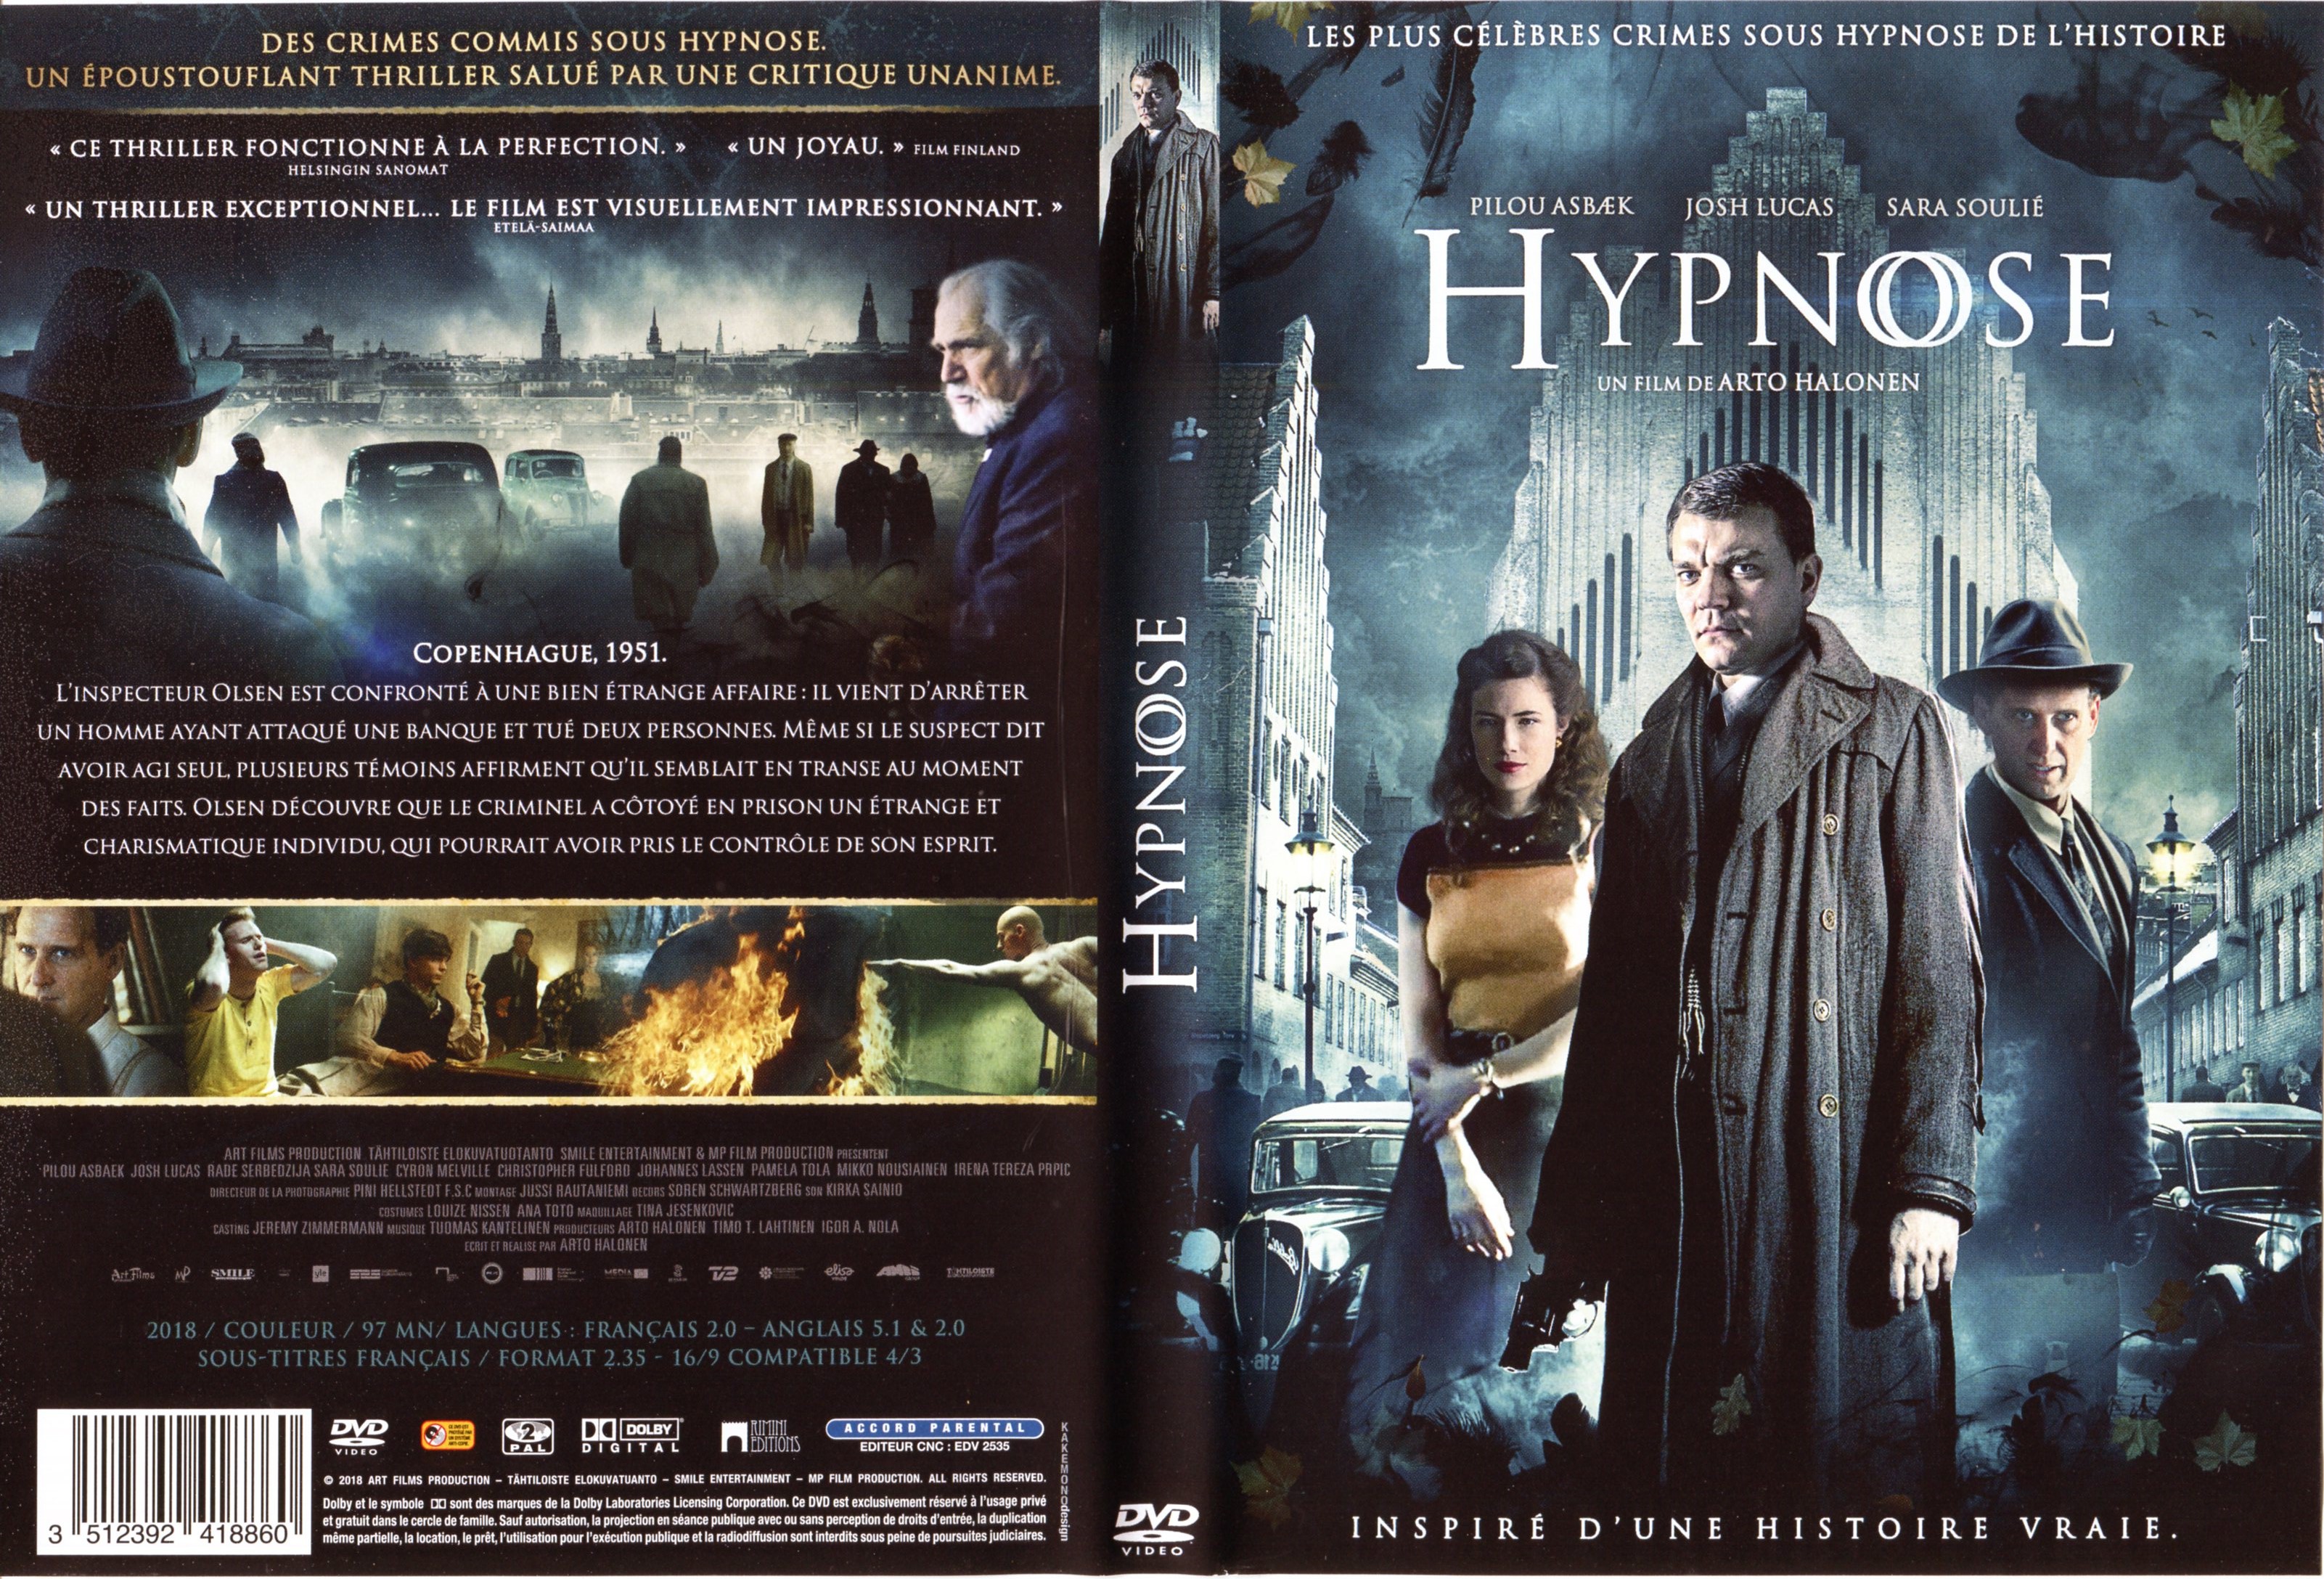 Jaquette DVD Hypnose (2018)